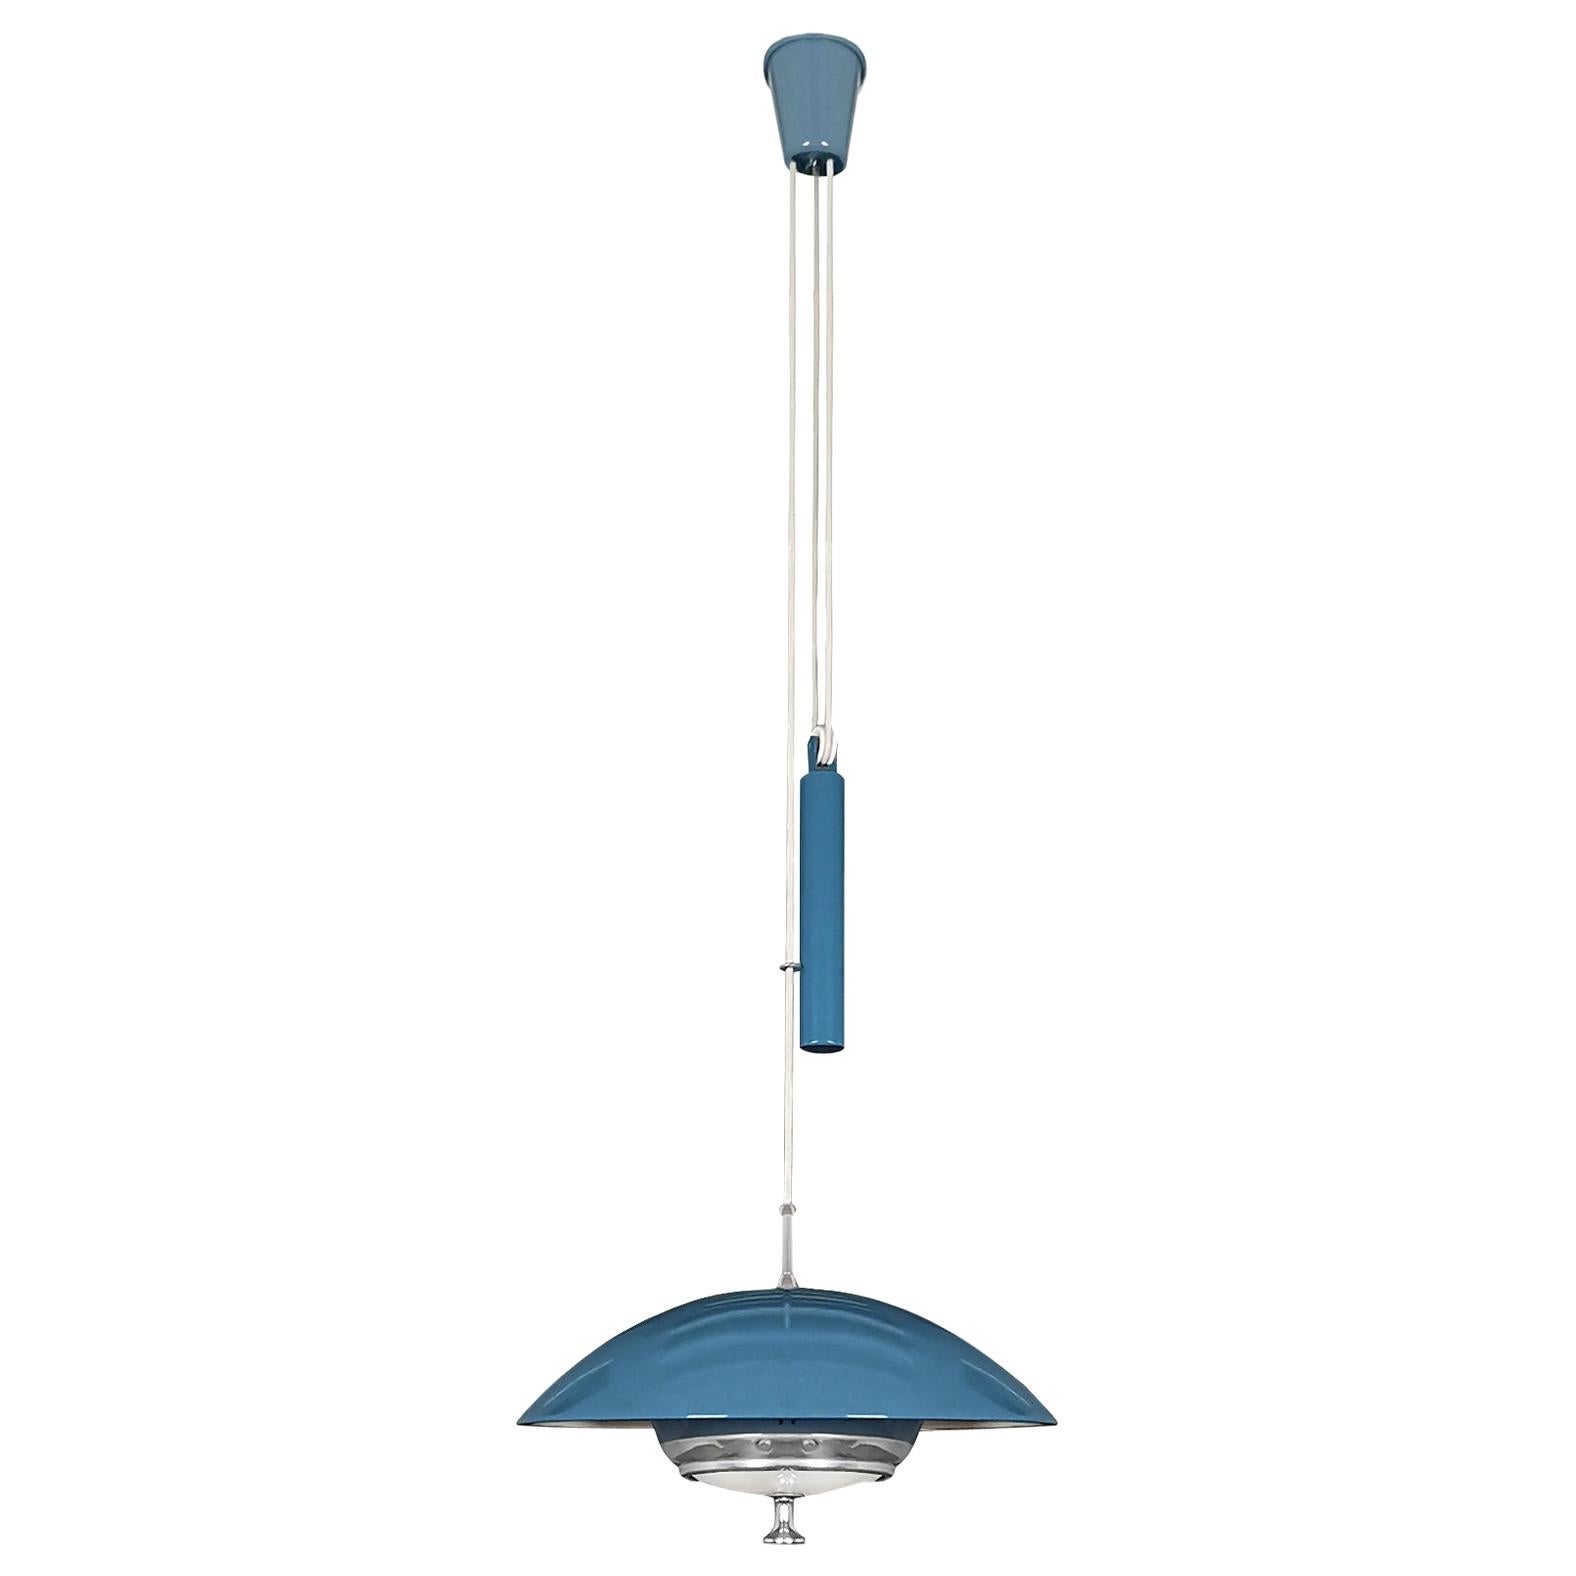 1940s Ceiling Lamp with Counterweight System, Blue Sheet Metal, Glass, Italy